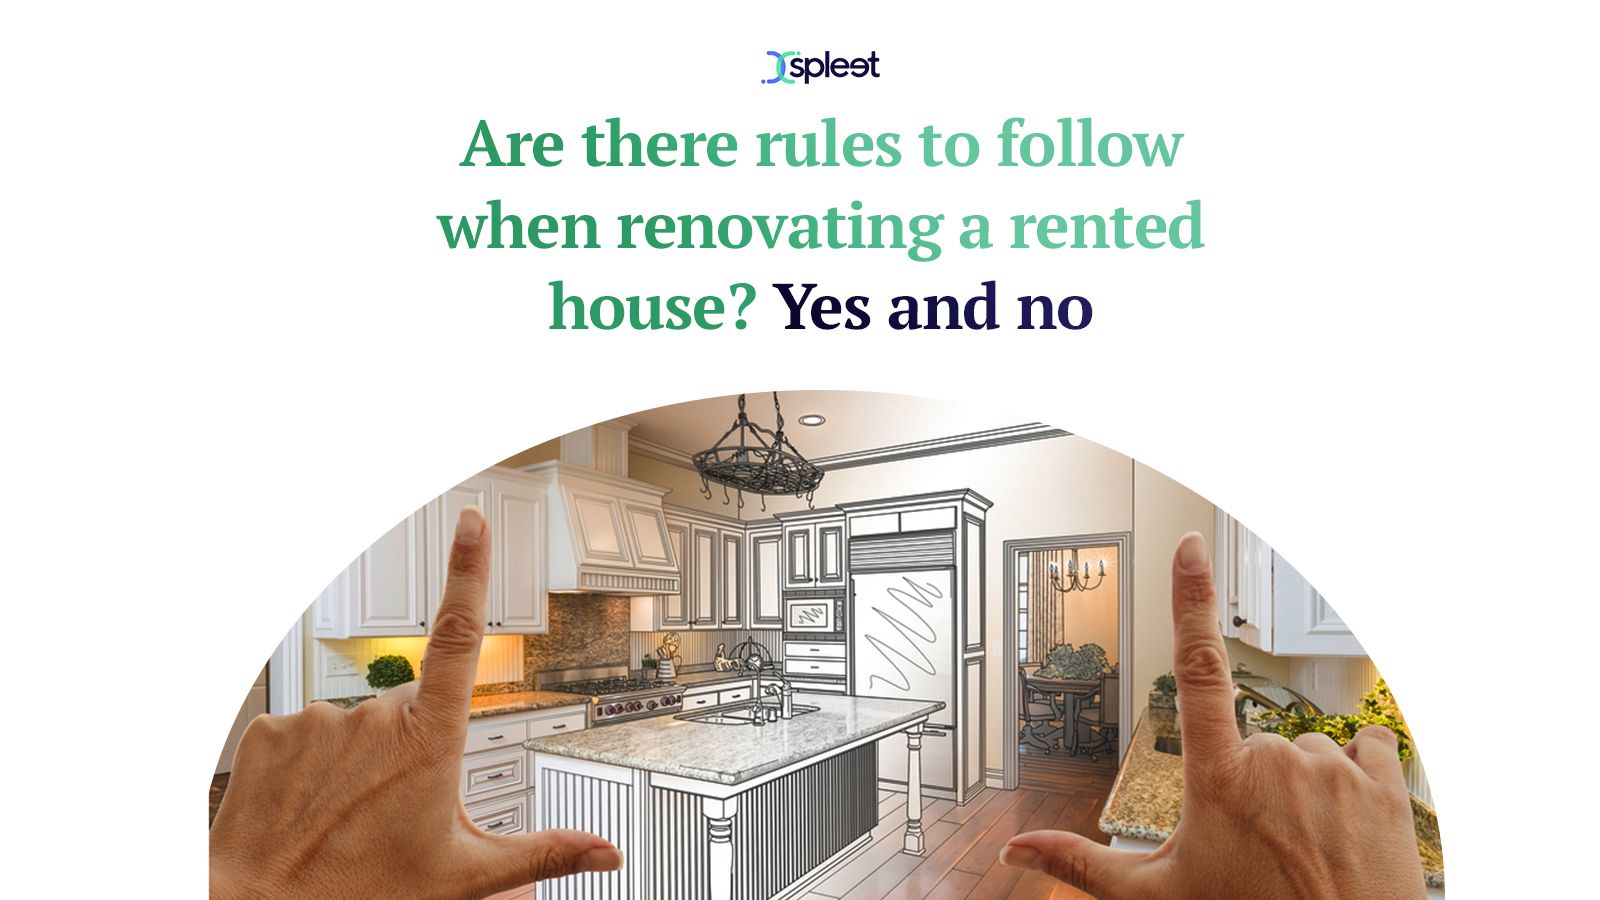 Are there rules to follow when renovating a rented house? Yes and no